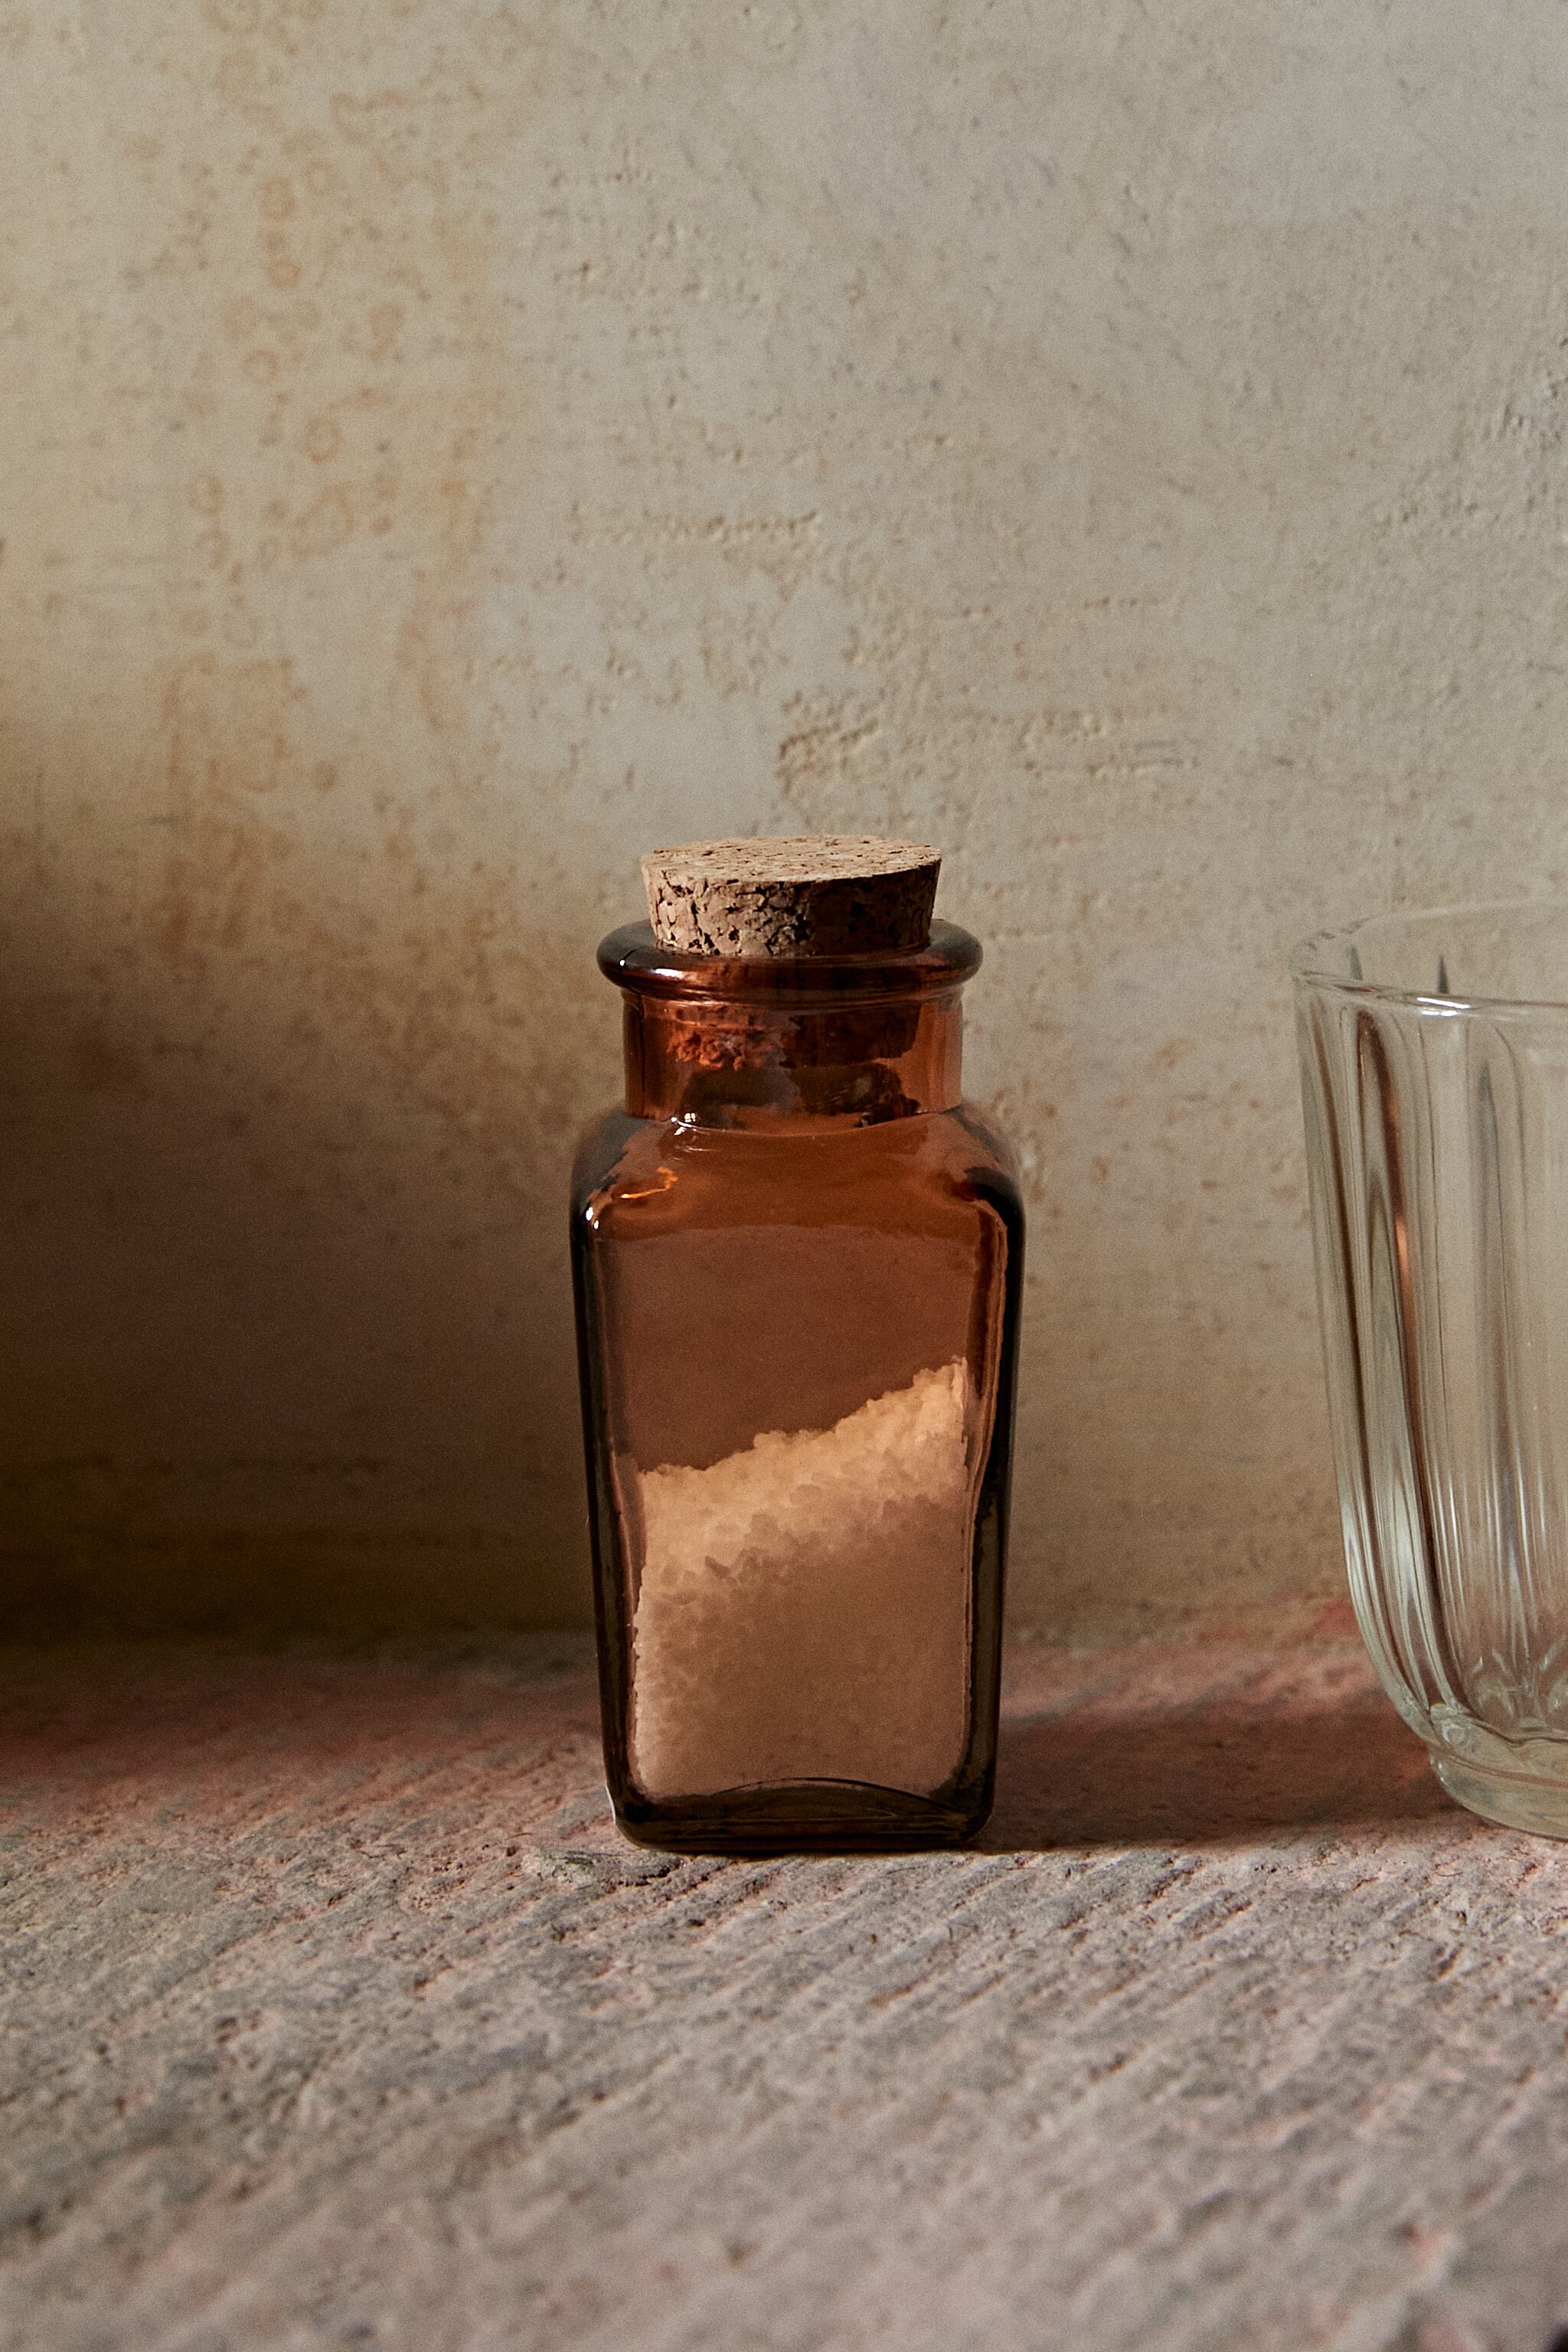 FACETED GLASS SALT SHAKER WITH CORK